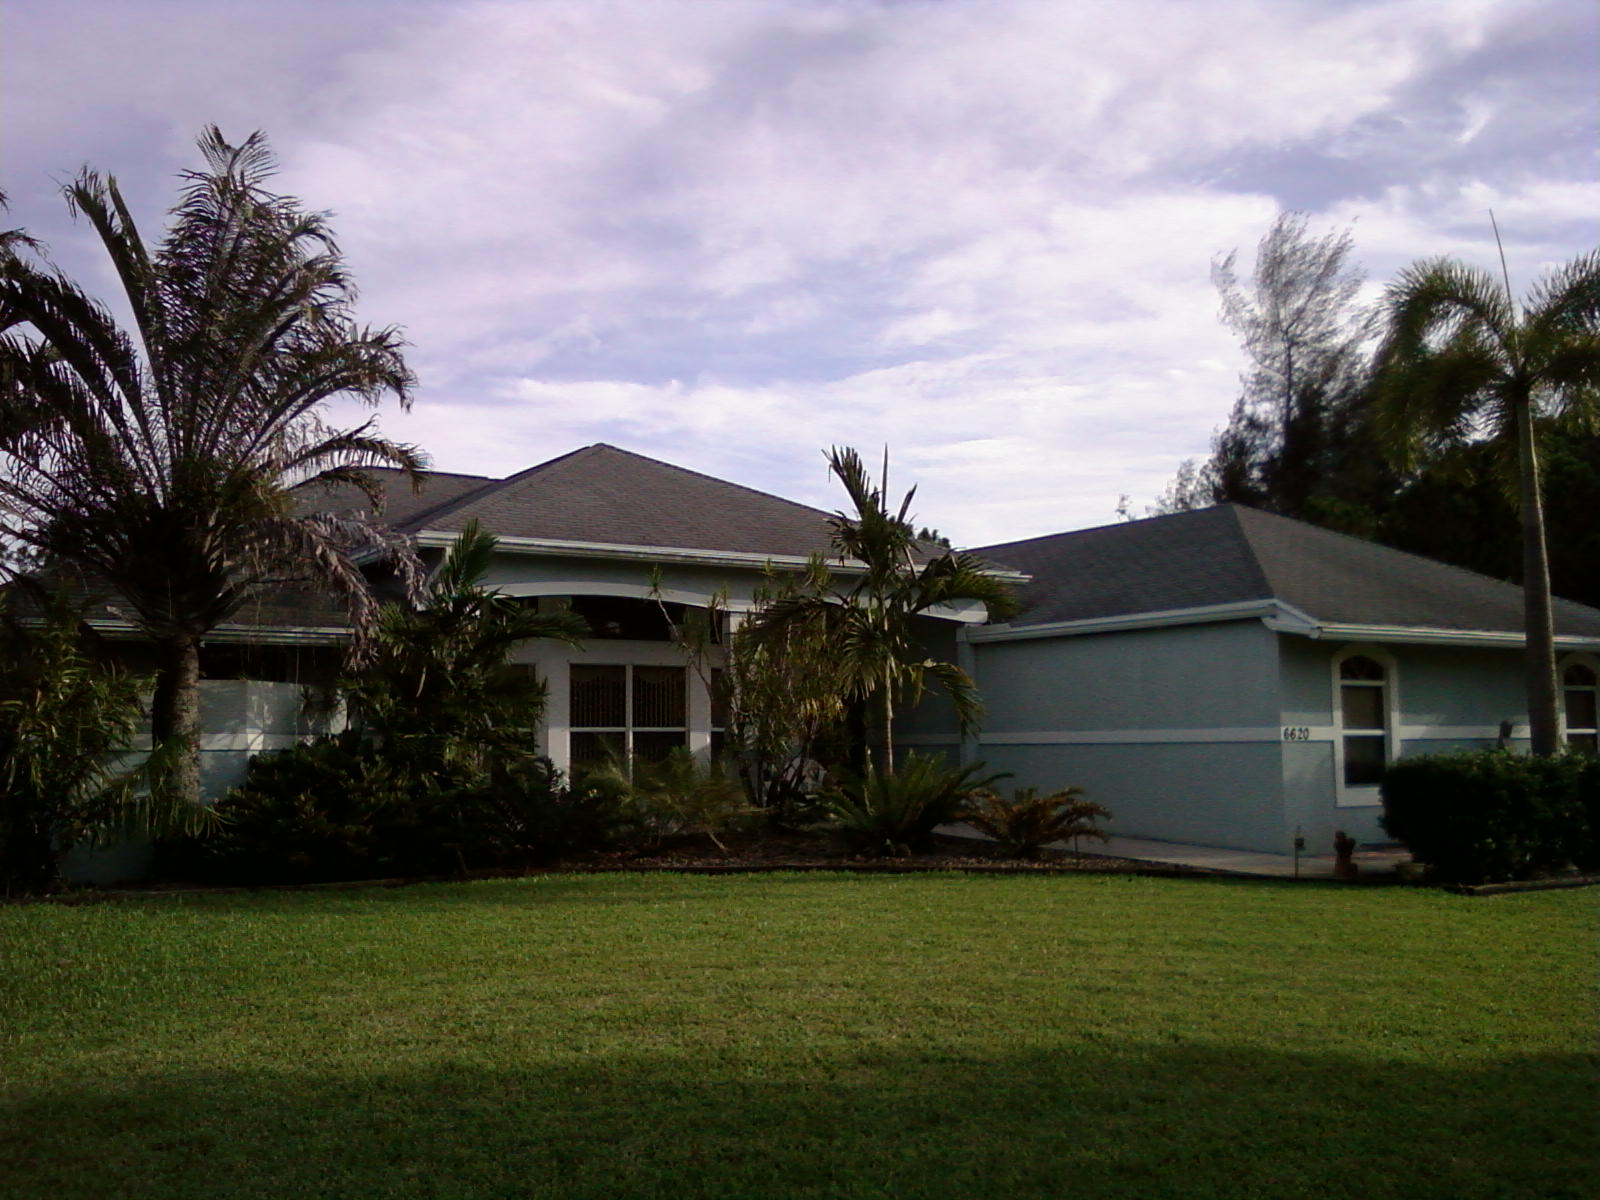 ABA Customs, Inc. 3 Tab Shingle Re-Roof Project in Palm Beach Gardens, Florida!